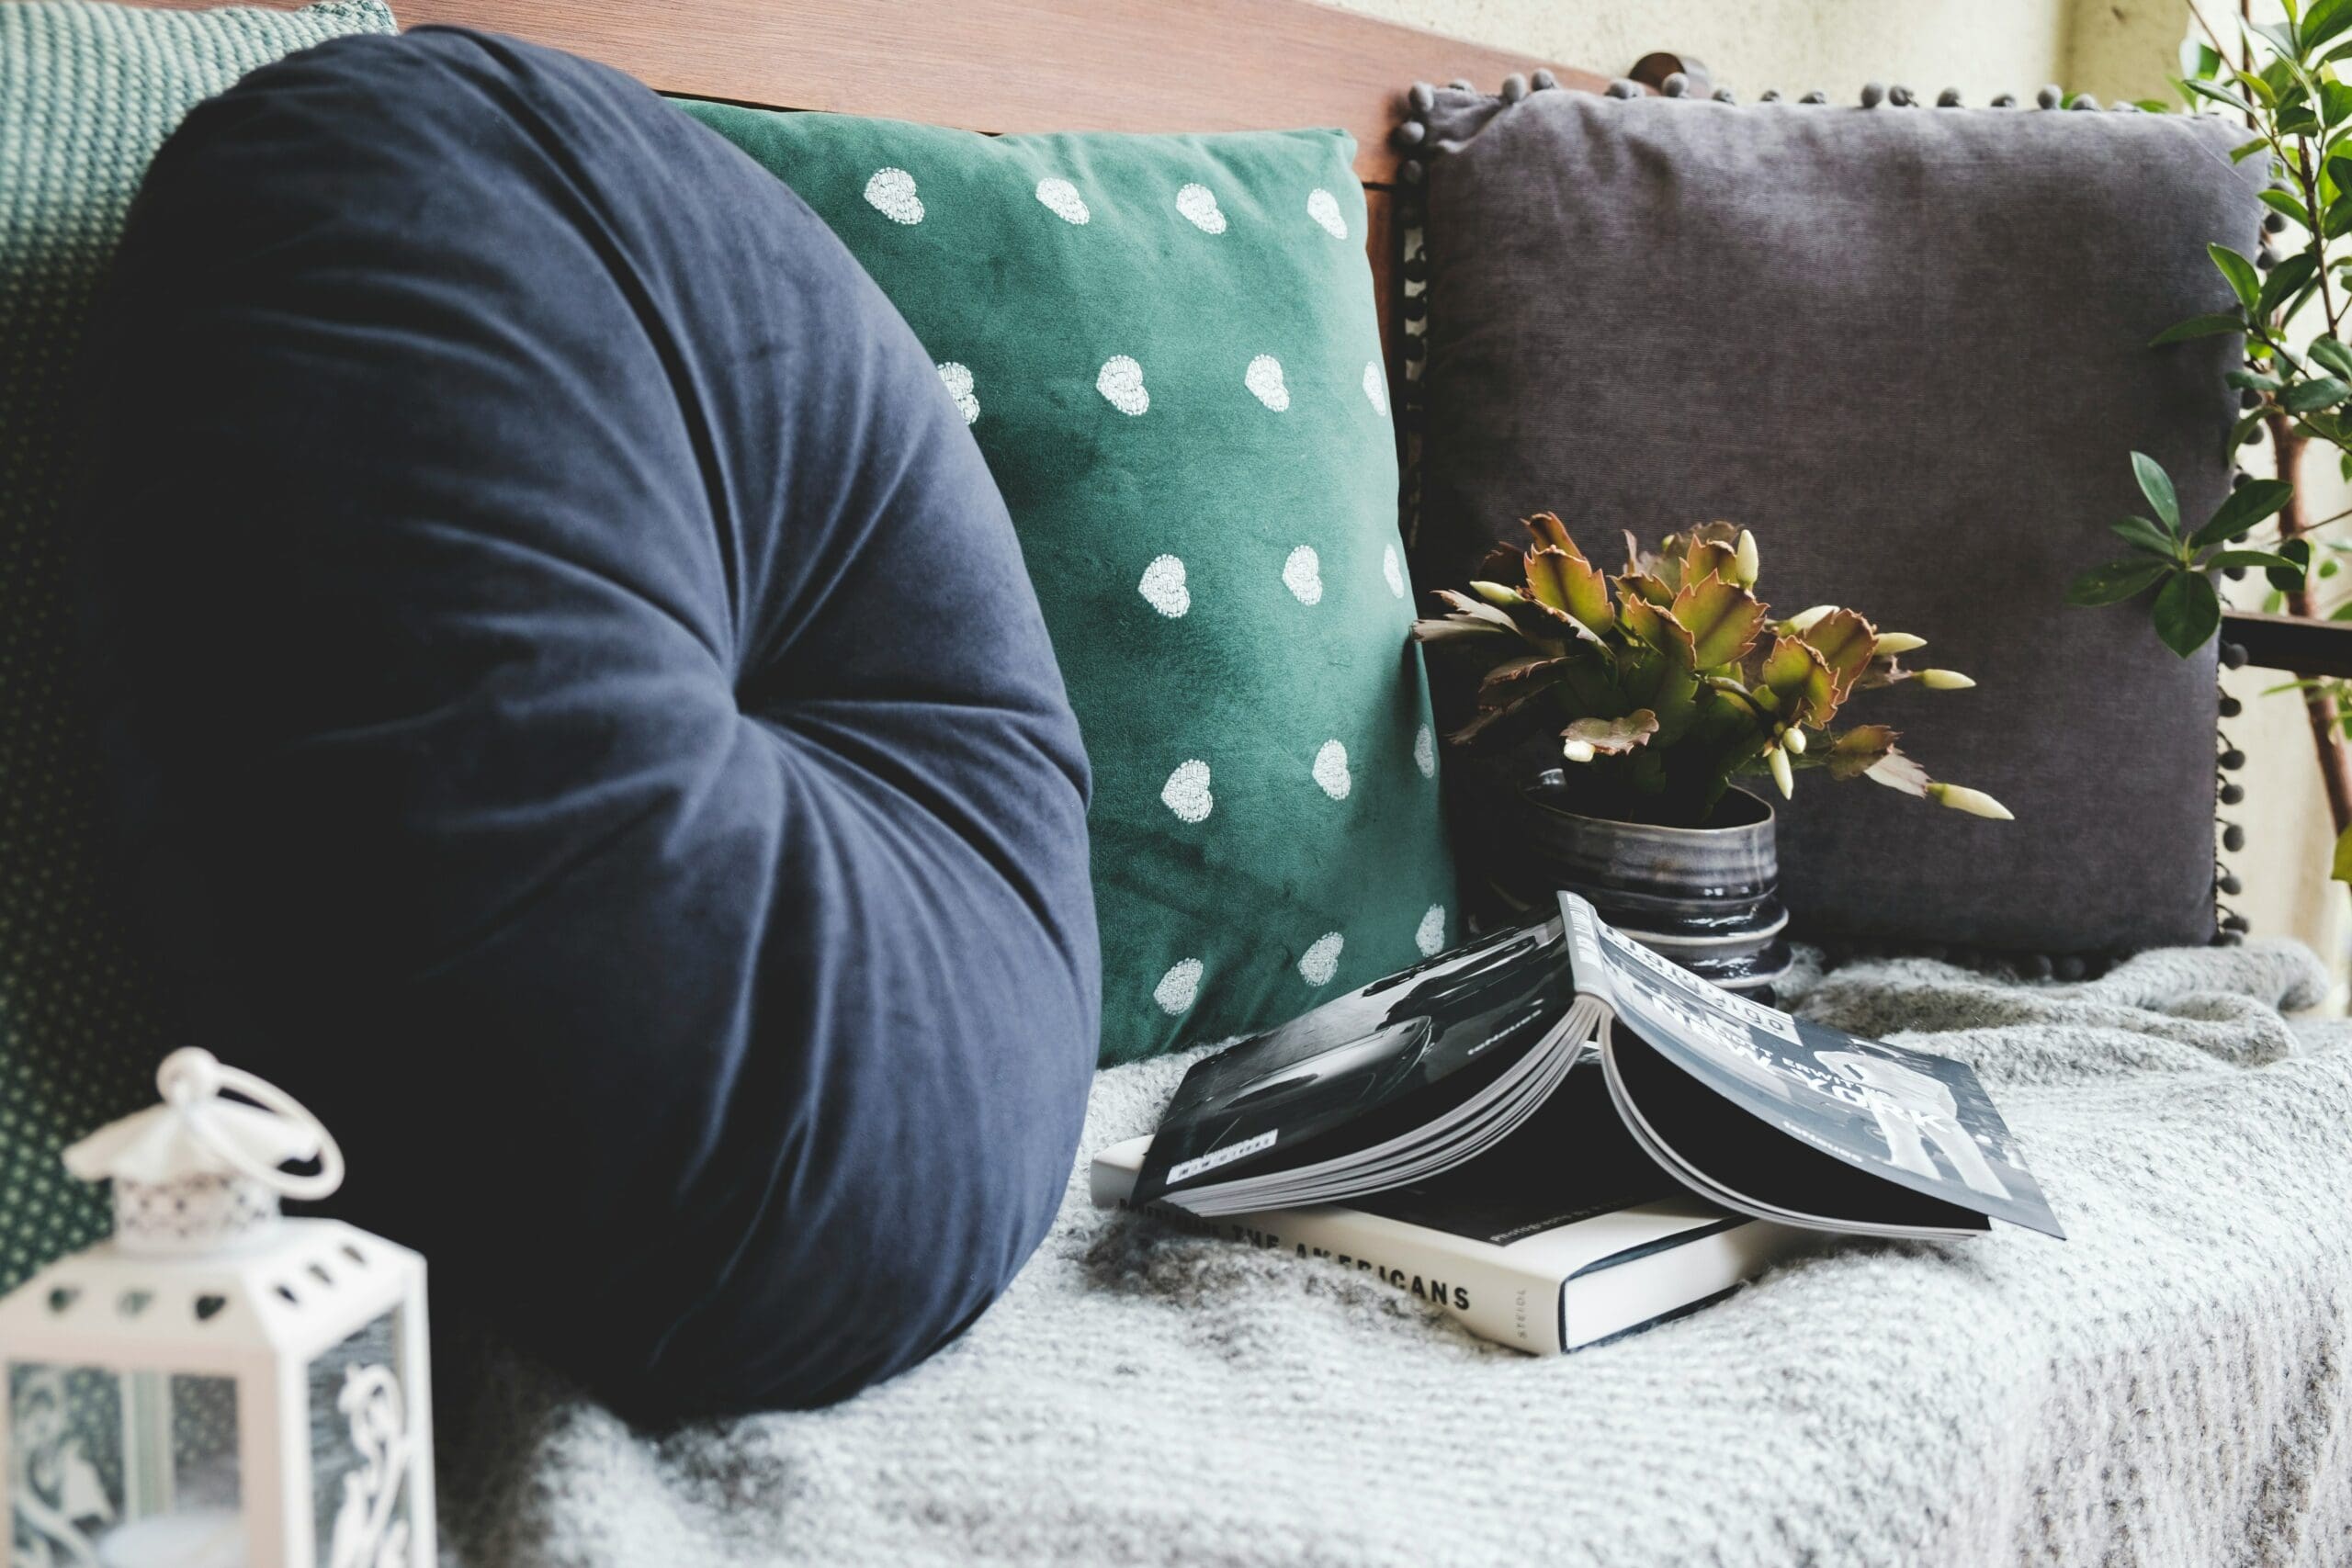 Winter-friendly home nook pillows and book